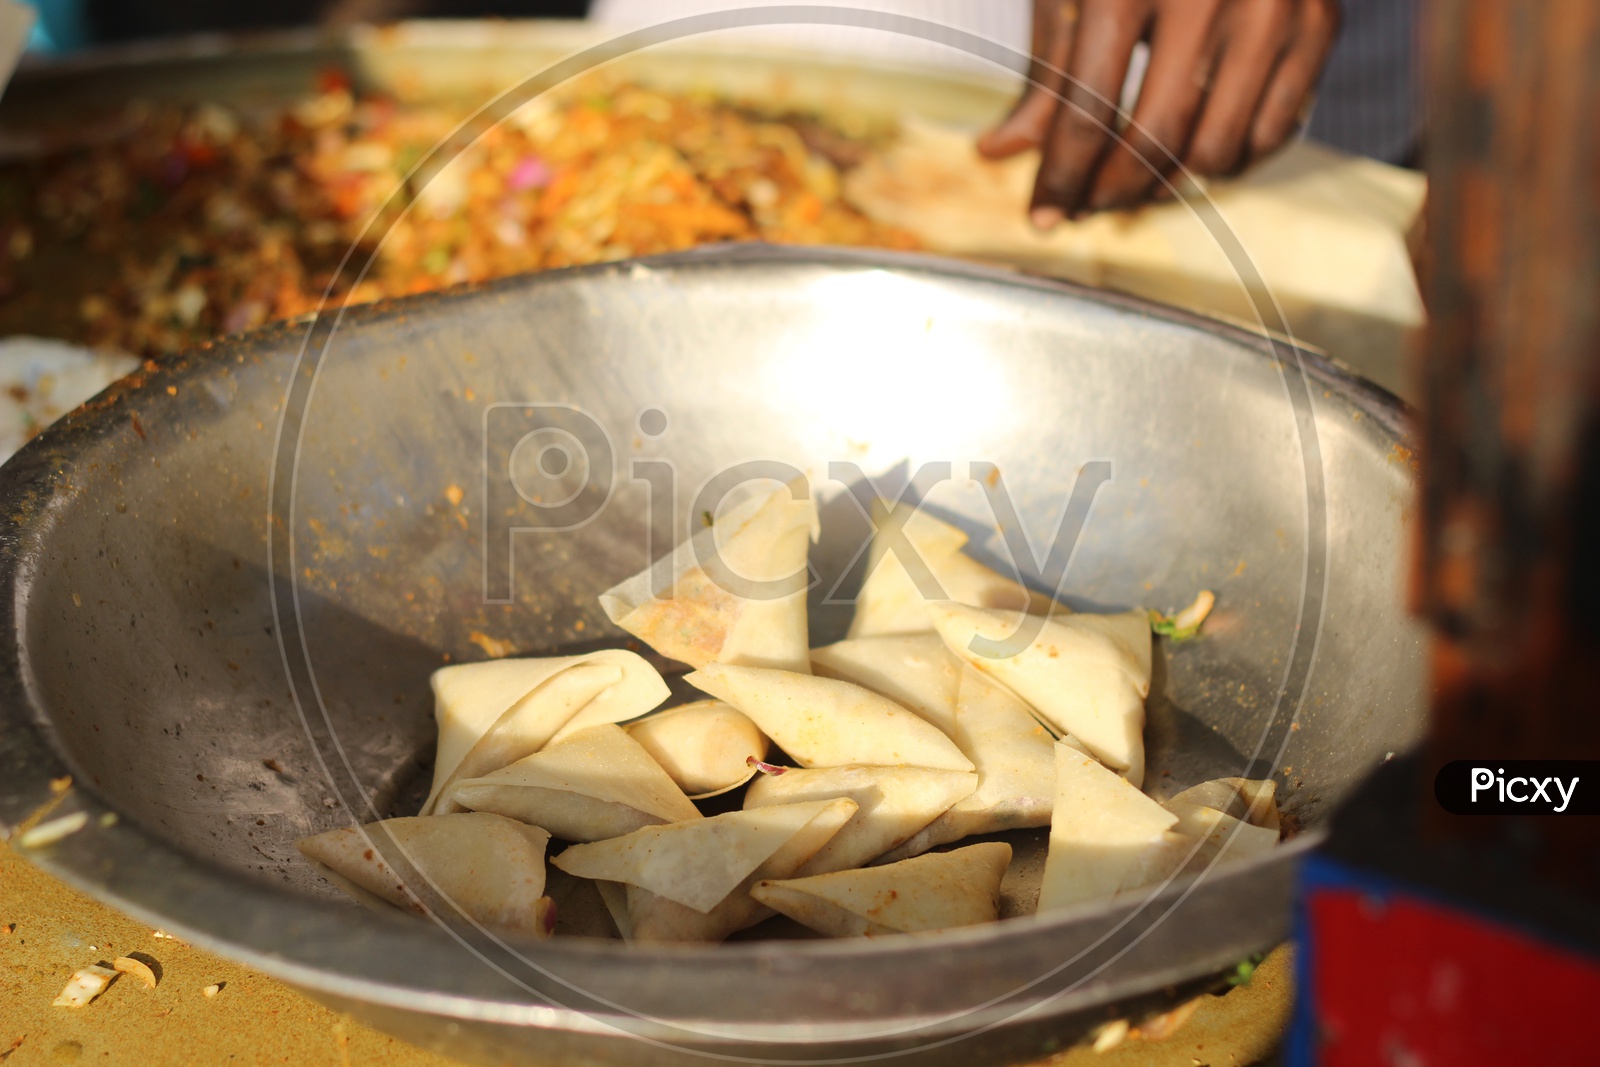 Indian Famous Street Food Samosa Preparing By a Vendor